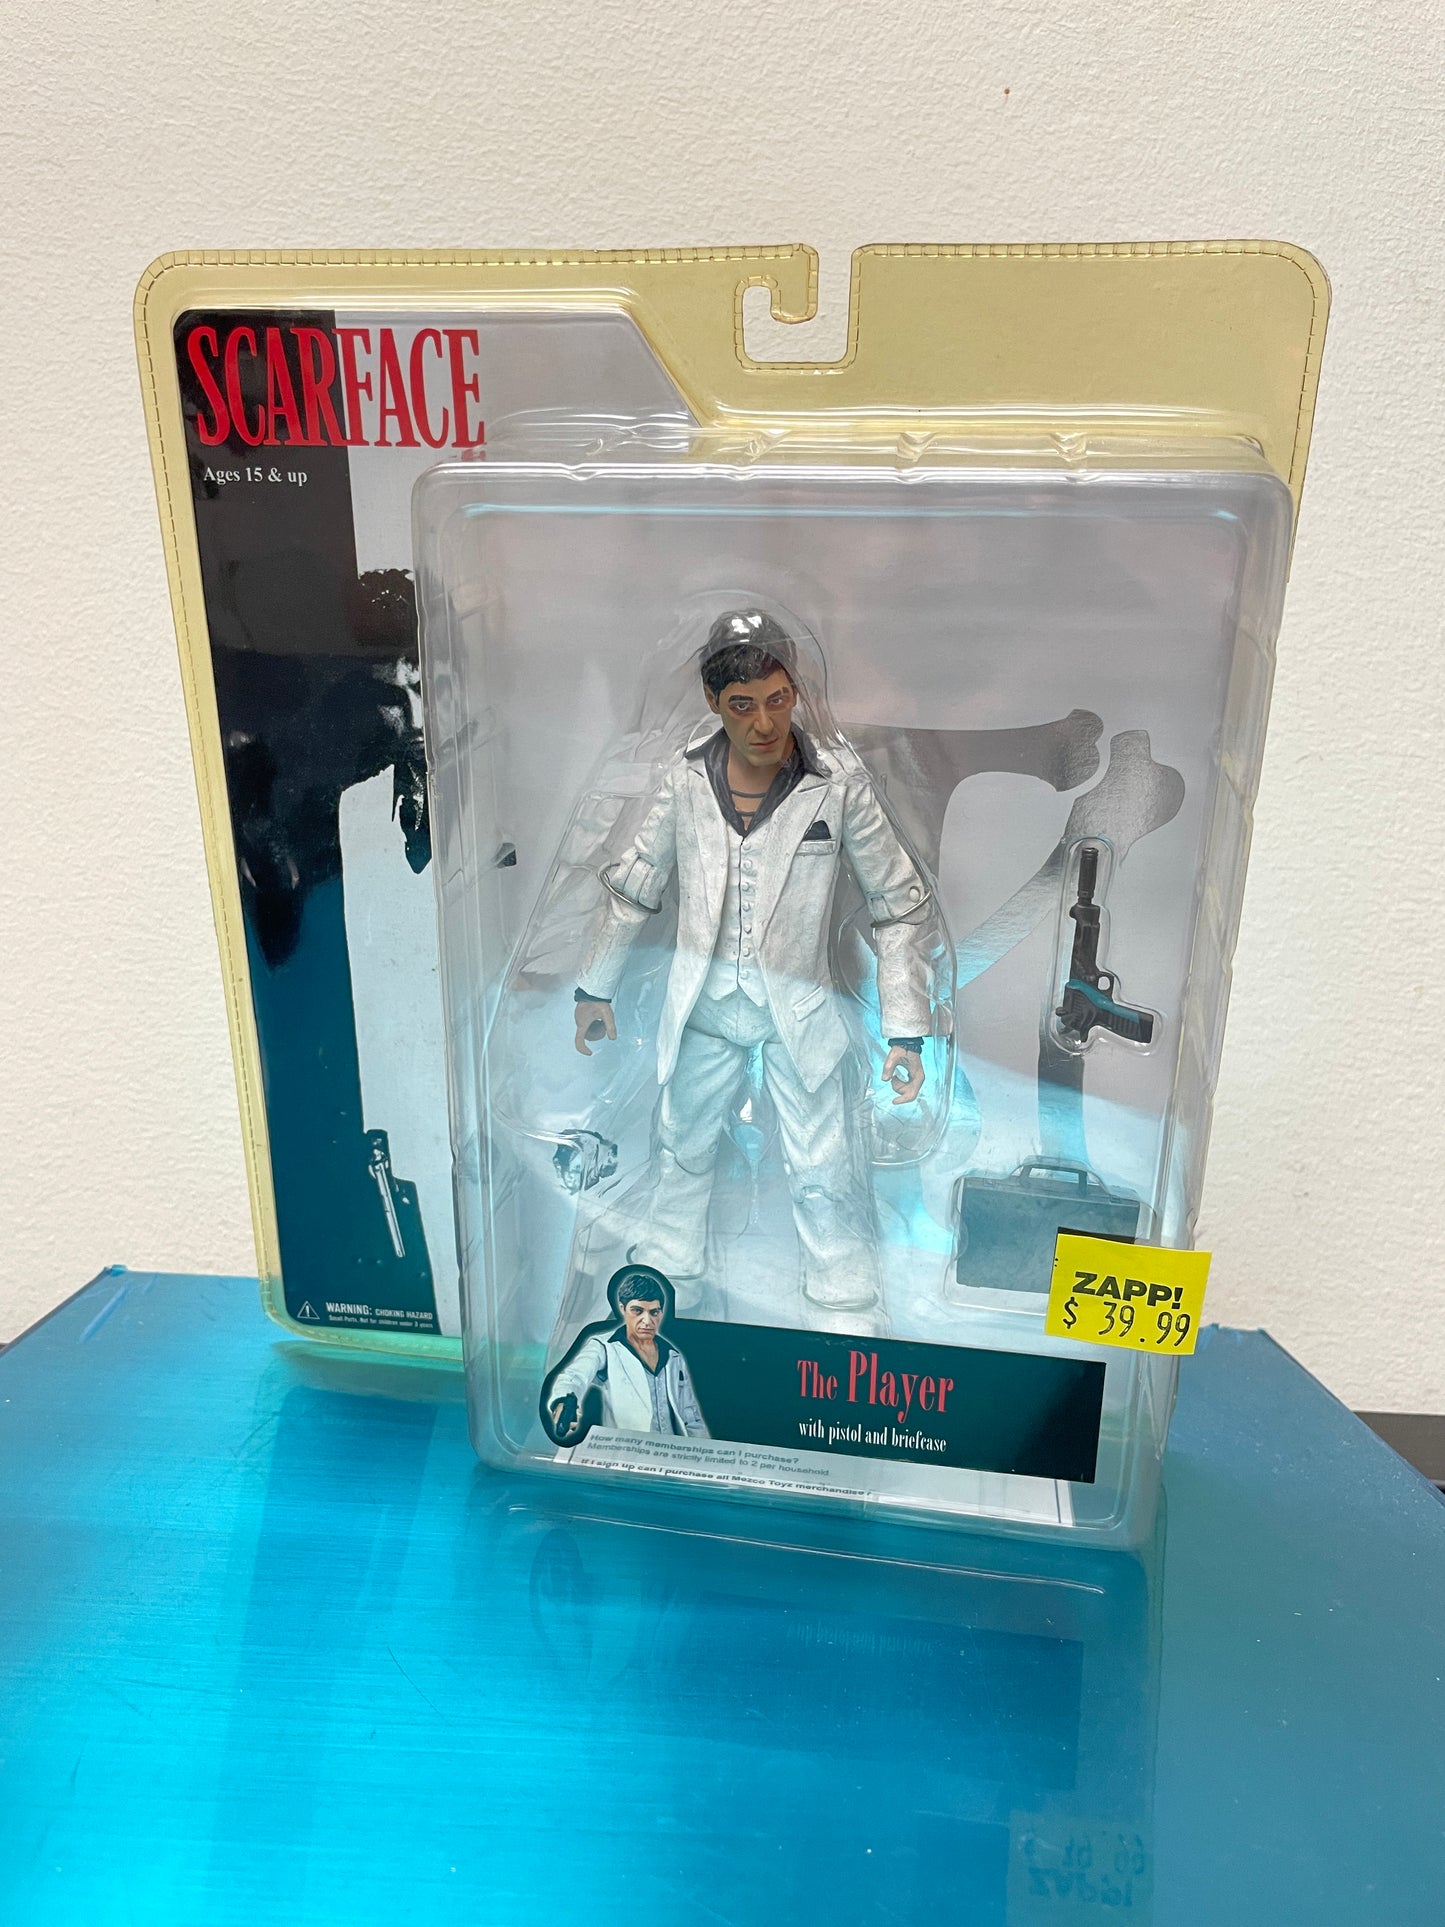 Mezco Scarface The Player 2005